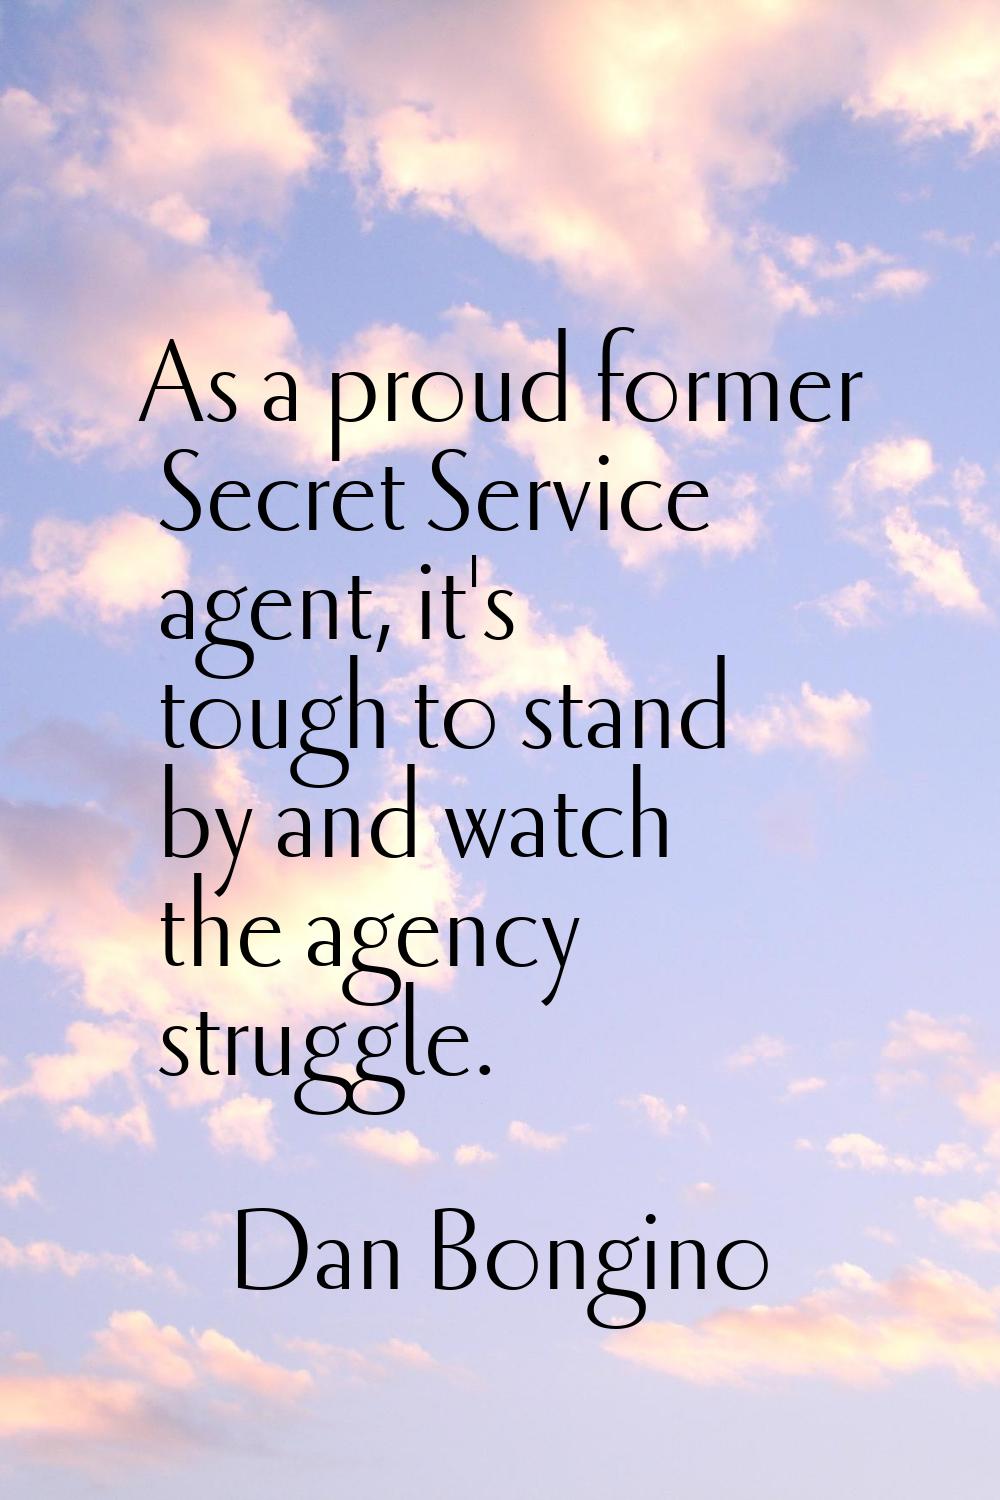 As a proud former Secret Service agent, it's tough to stand by and watch the agency struggle.